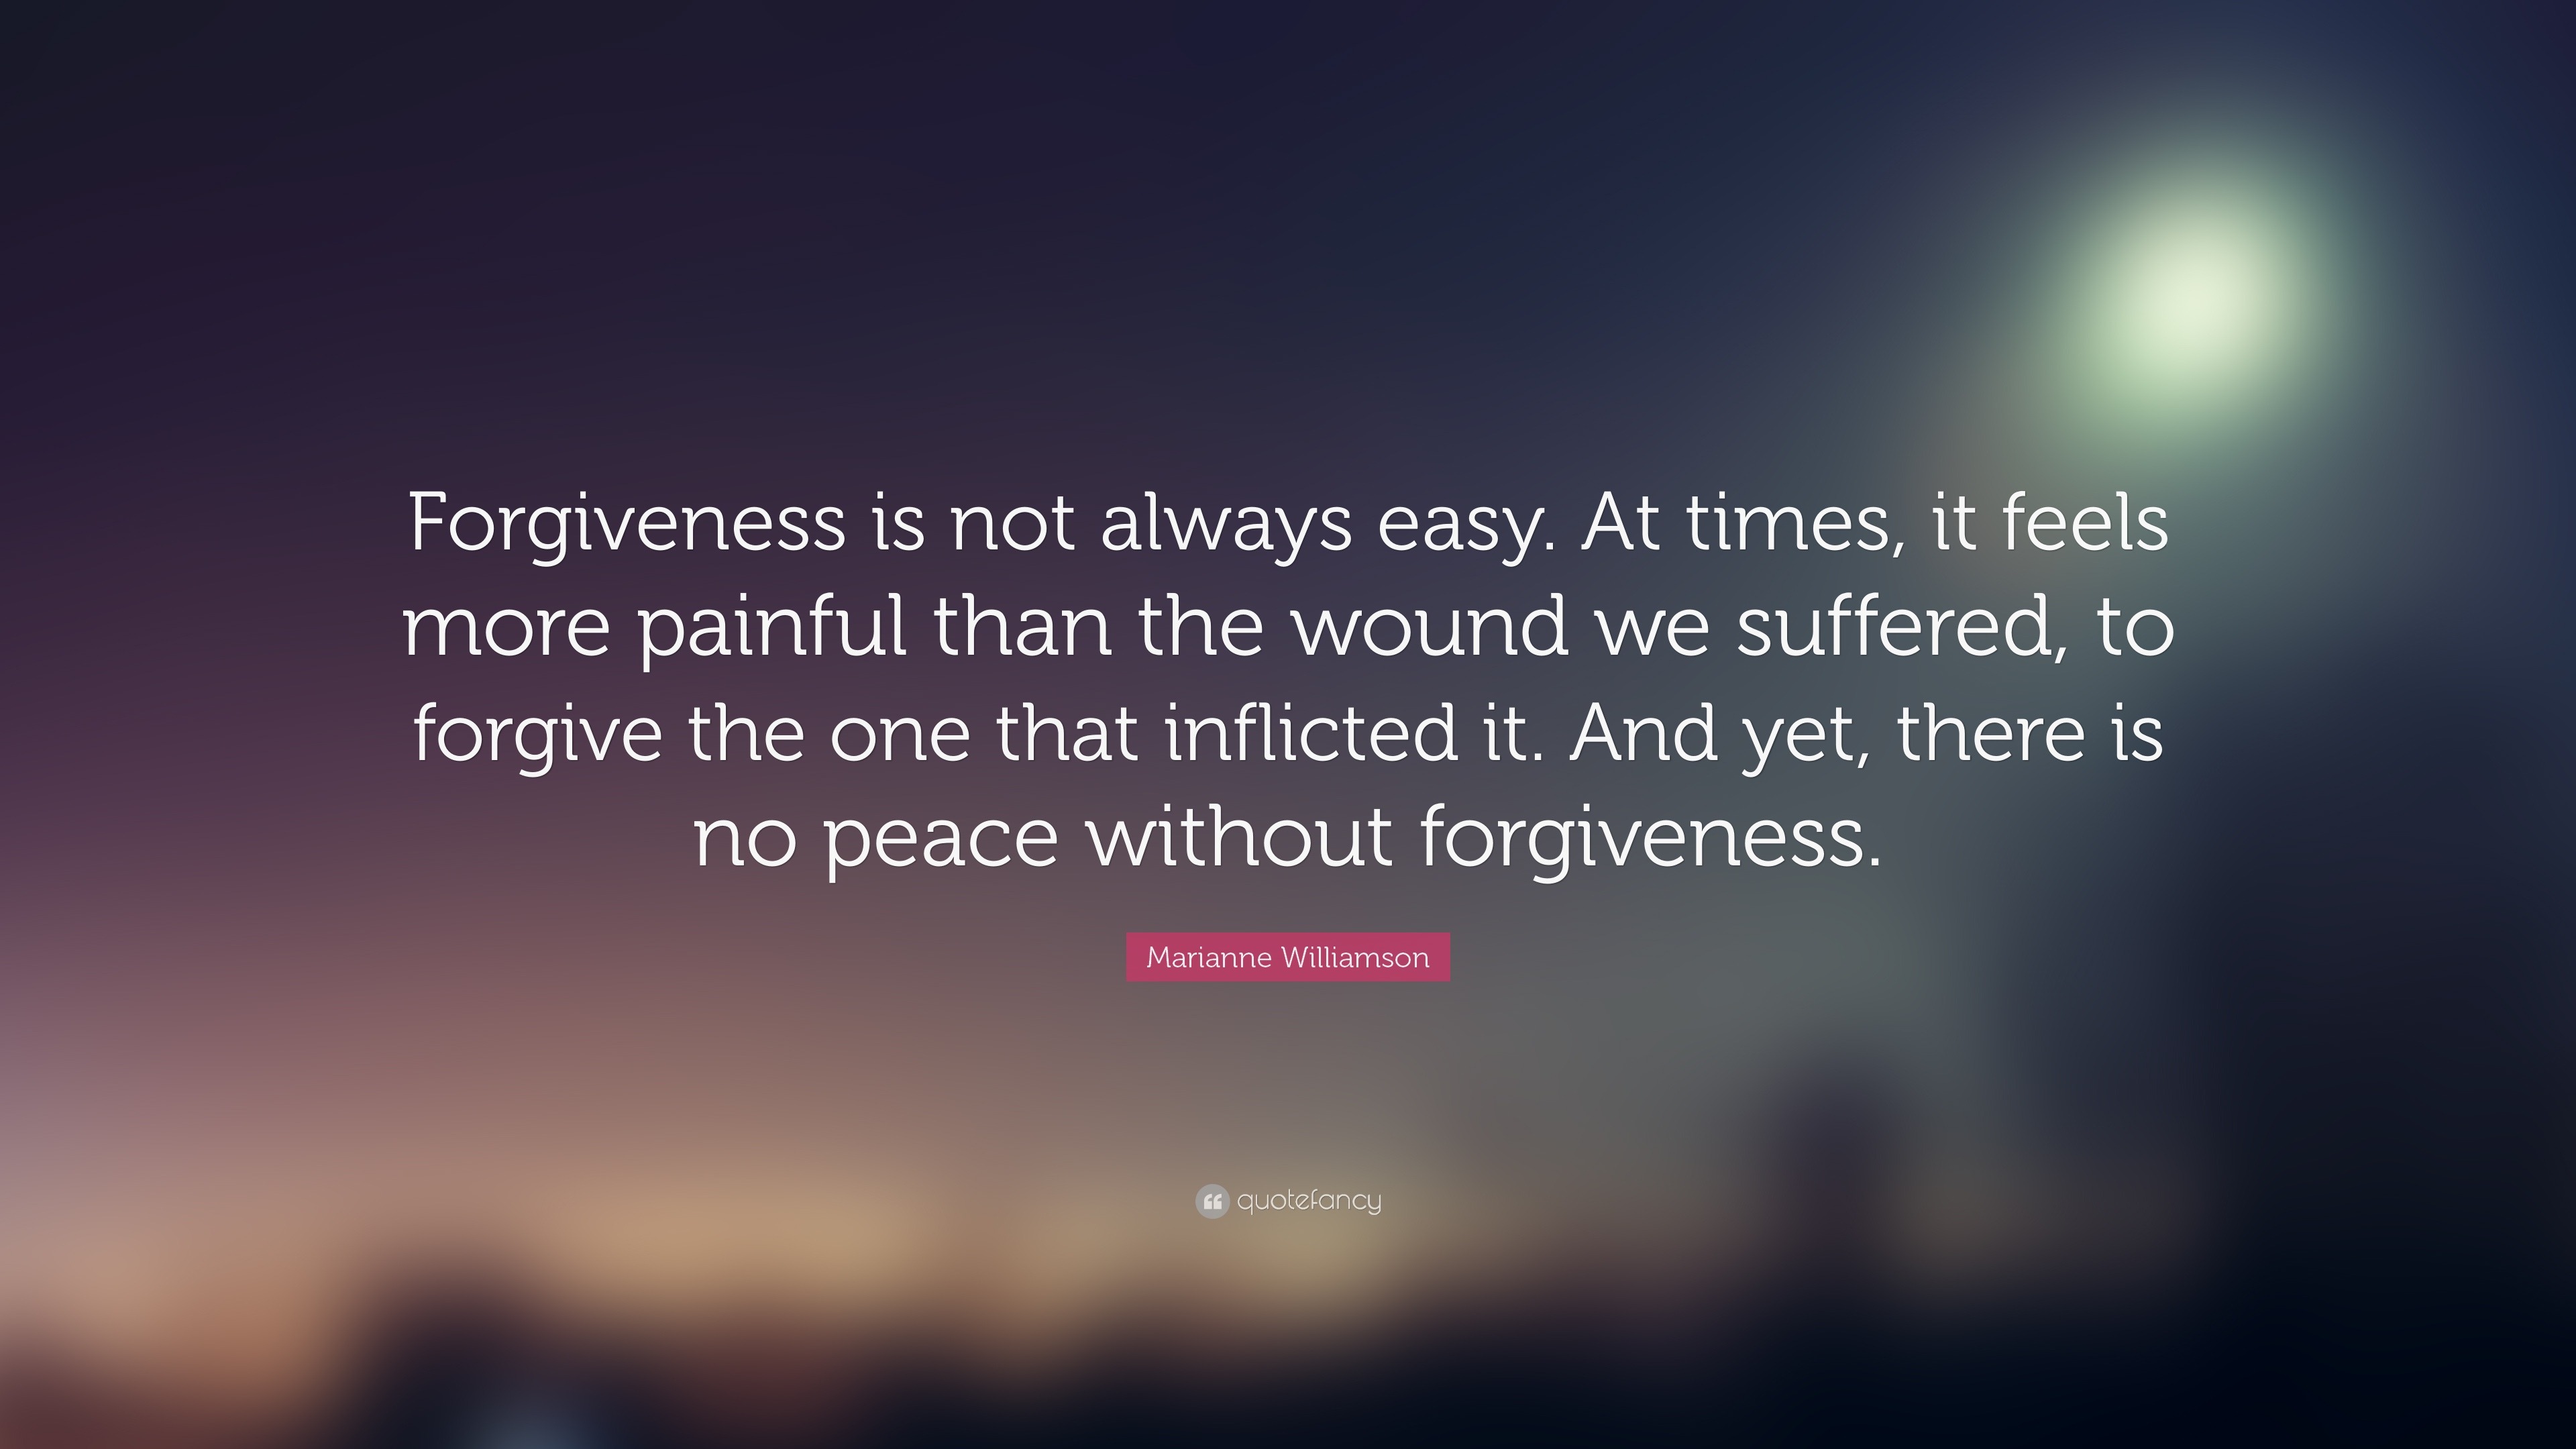 Forgiveness Quotes “Forgiveness is not always easy At times it feels more